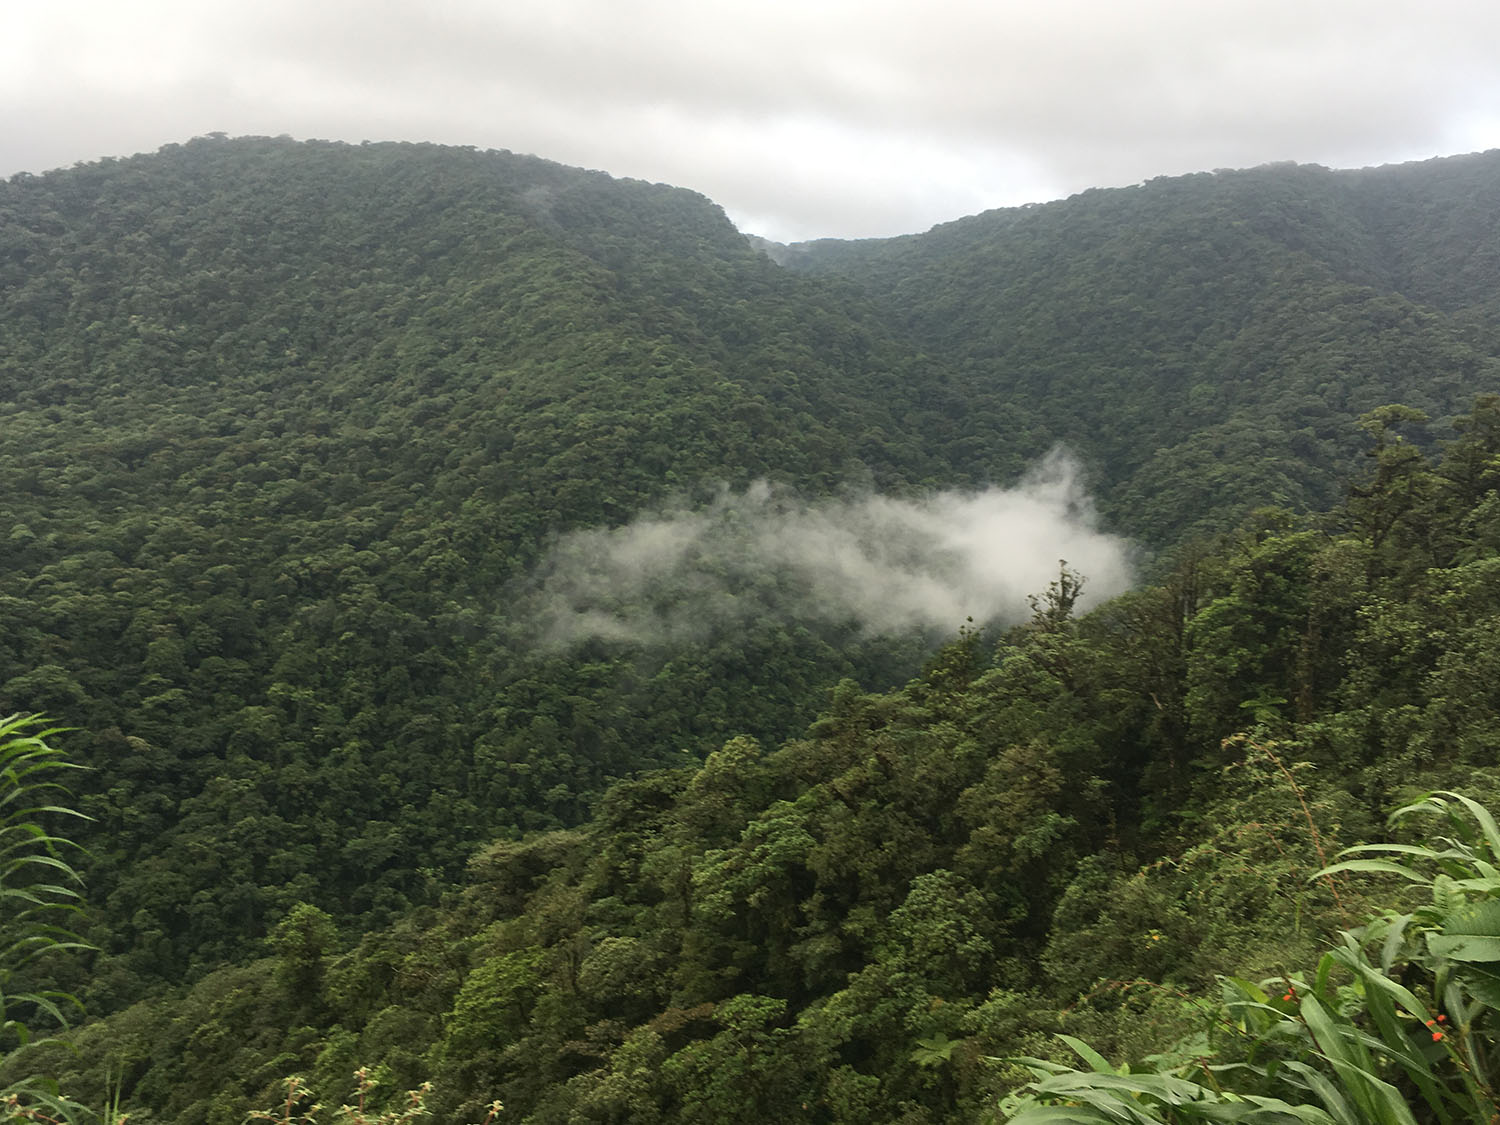 Mountains at the Braulio Carrillo National Park in Costa Rica